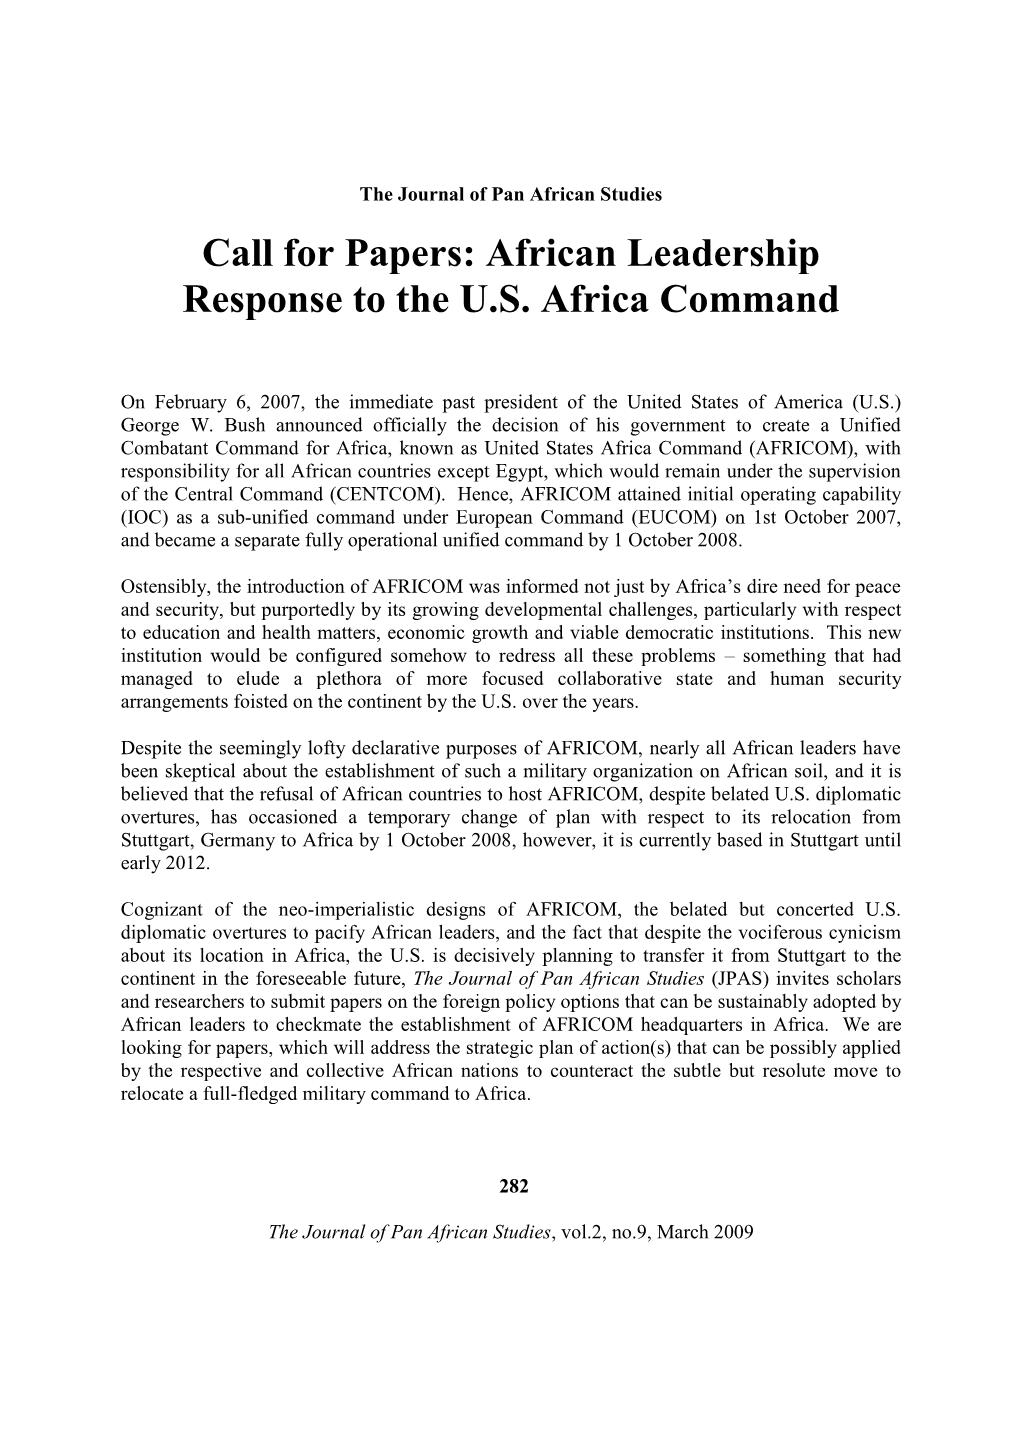 Call for Papers: African Leadership Response to the U.S. Africa Command